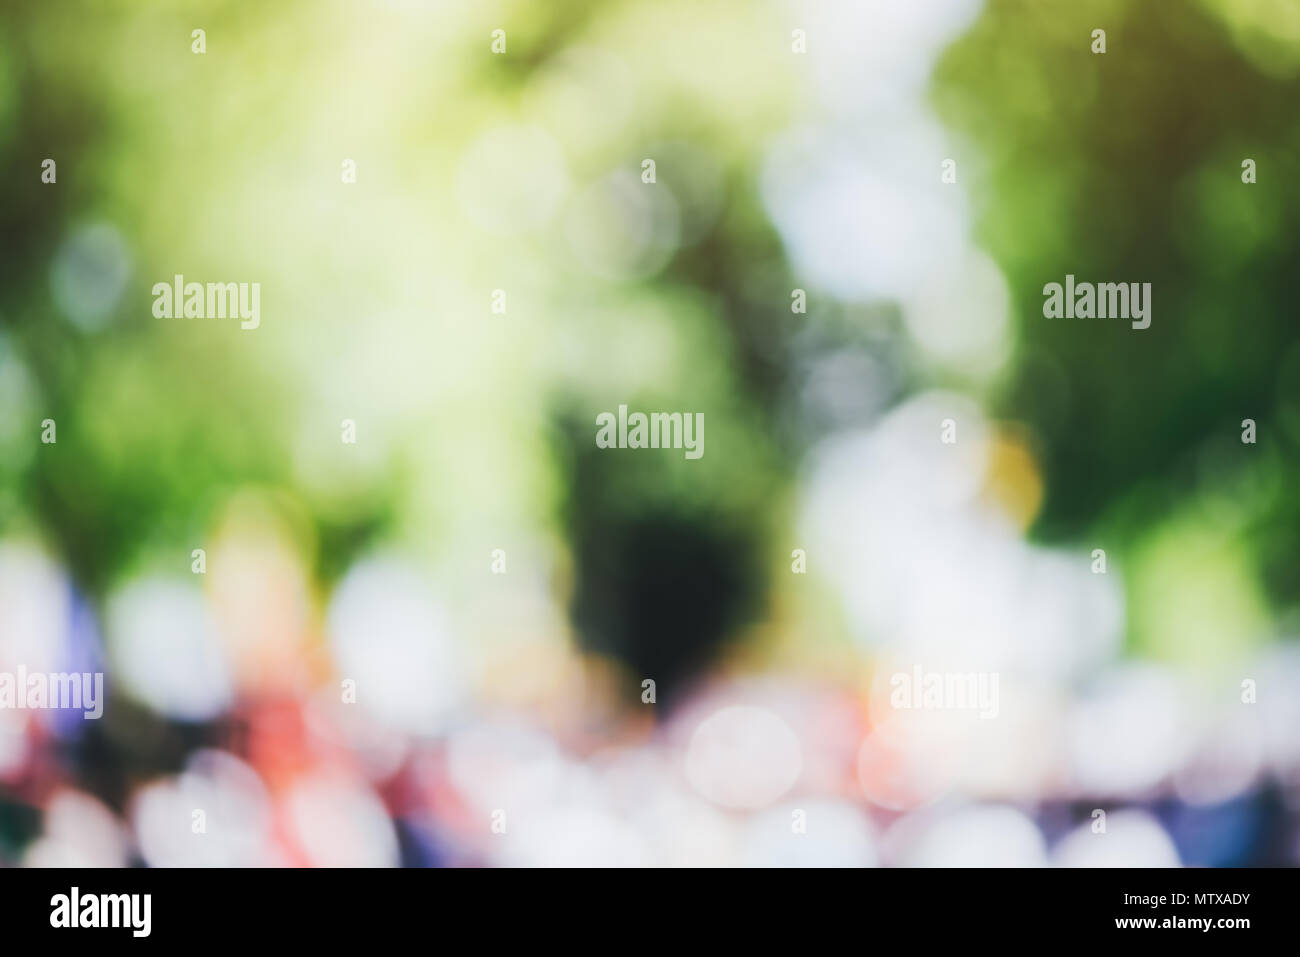 Colorful blurry urban scene as abstract background, out of focus backdrop for web site design Stock Photo